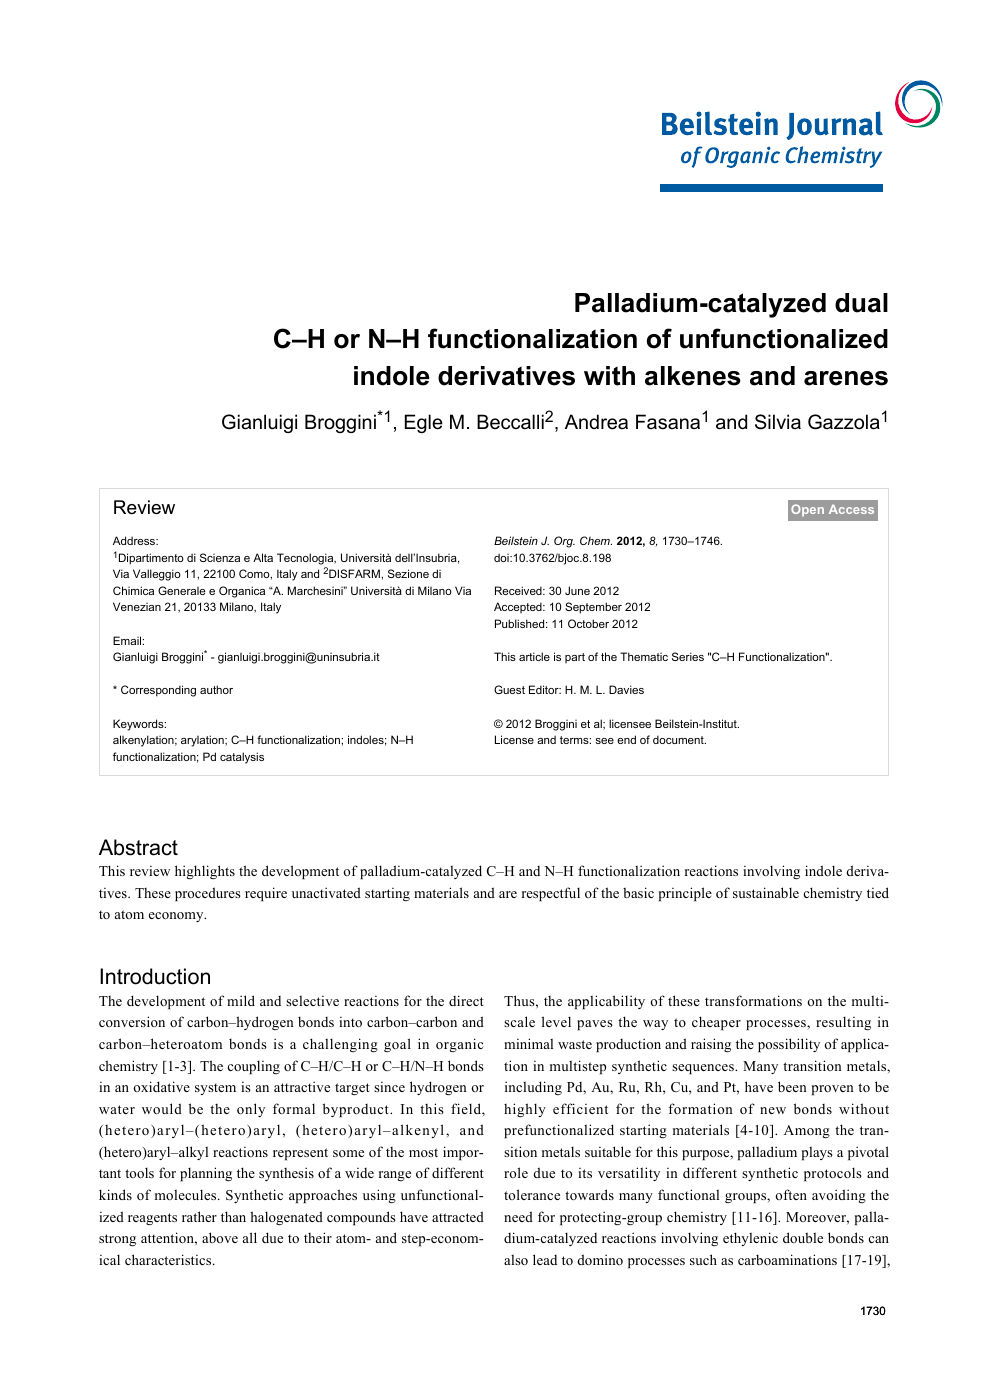 Palladium Catalyzed Dual C H Or N H Functionalization Of Unfunctionalized Indole Derivatives With Alkenes And Arenes Topic Of Research Paper In Chemical Sciences Download Scholarly Article Pdf And Read For Free On Cyberleninka